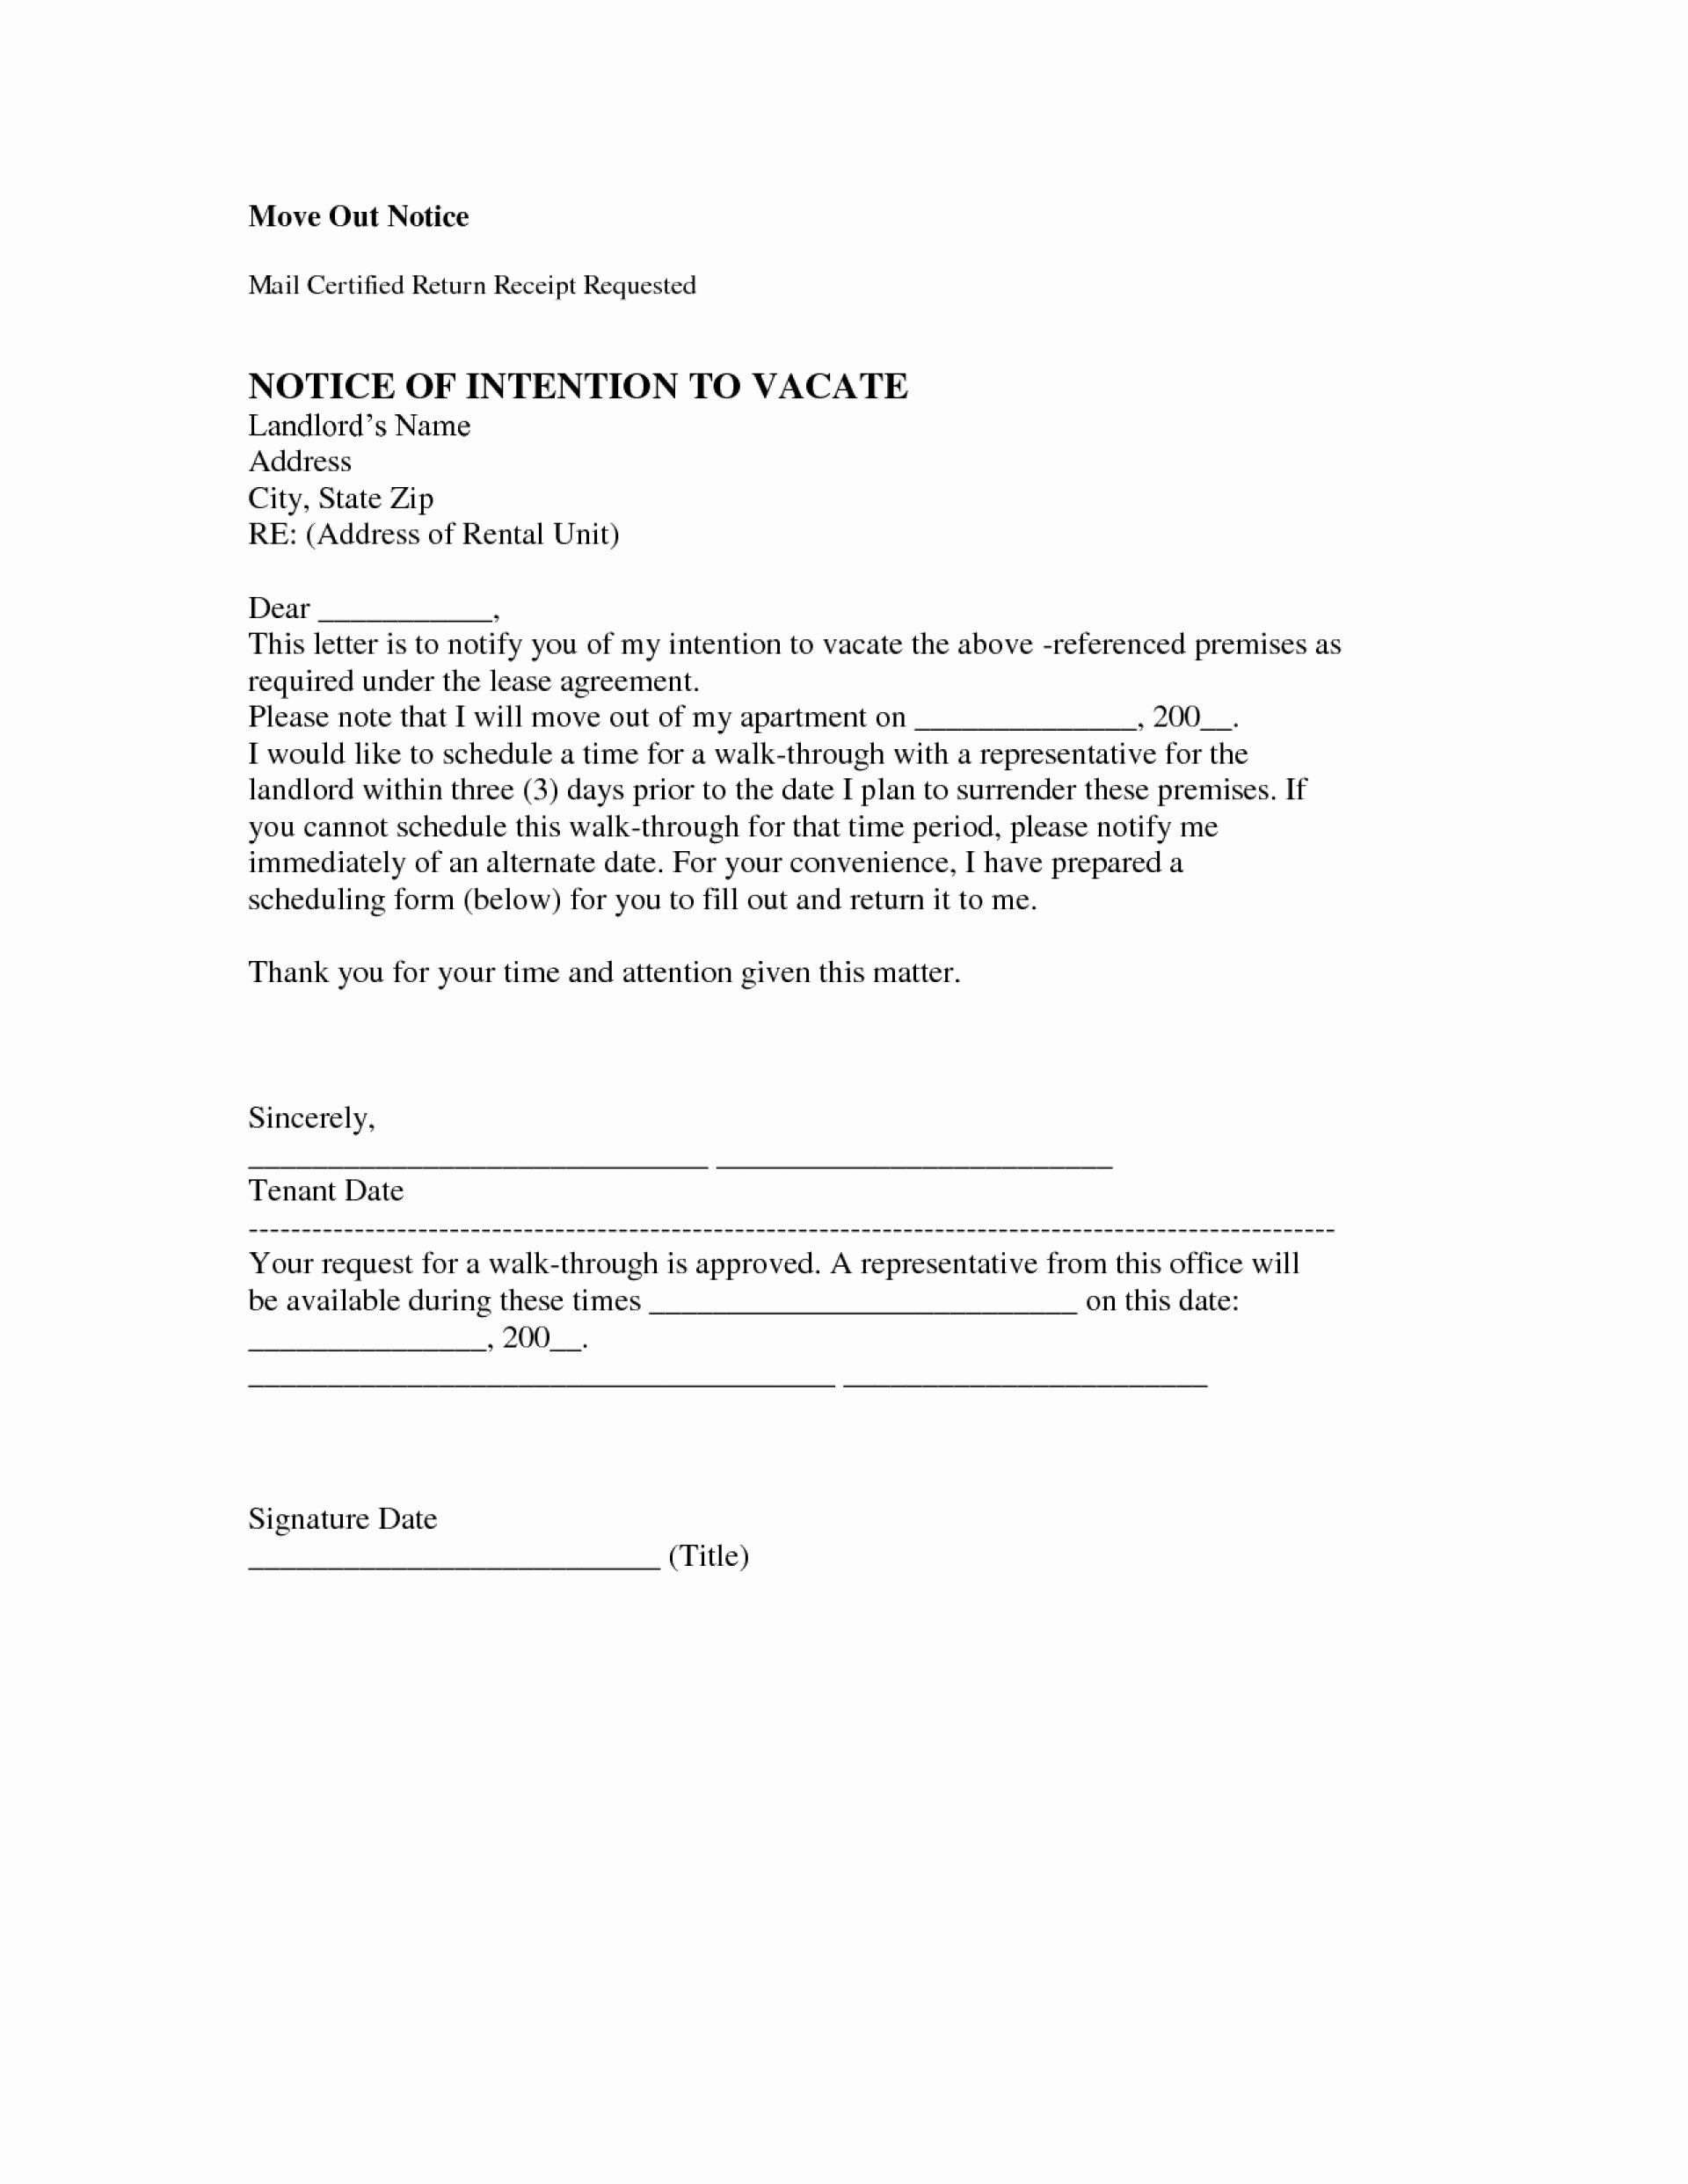 Move Out Letter Elegant Vacating Apartment Letter Sample form Template